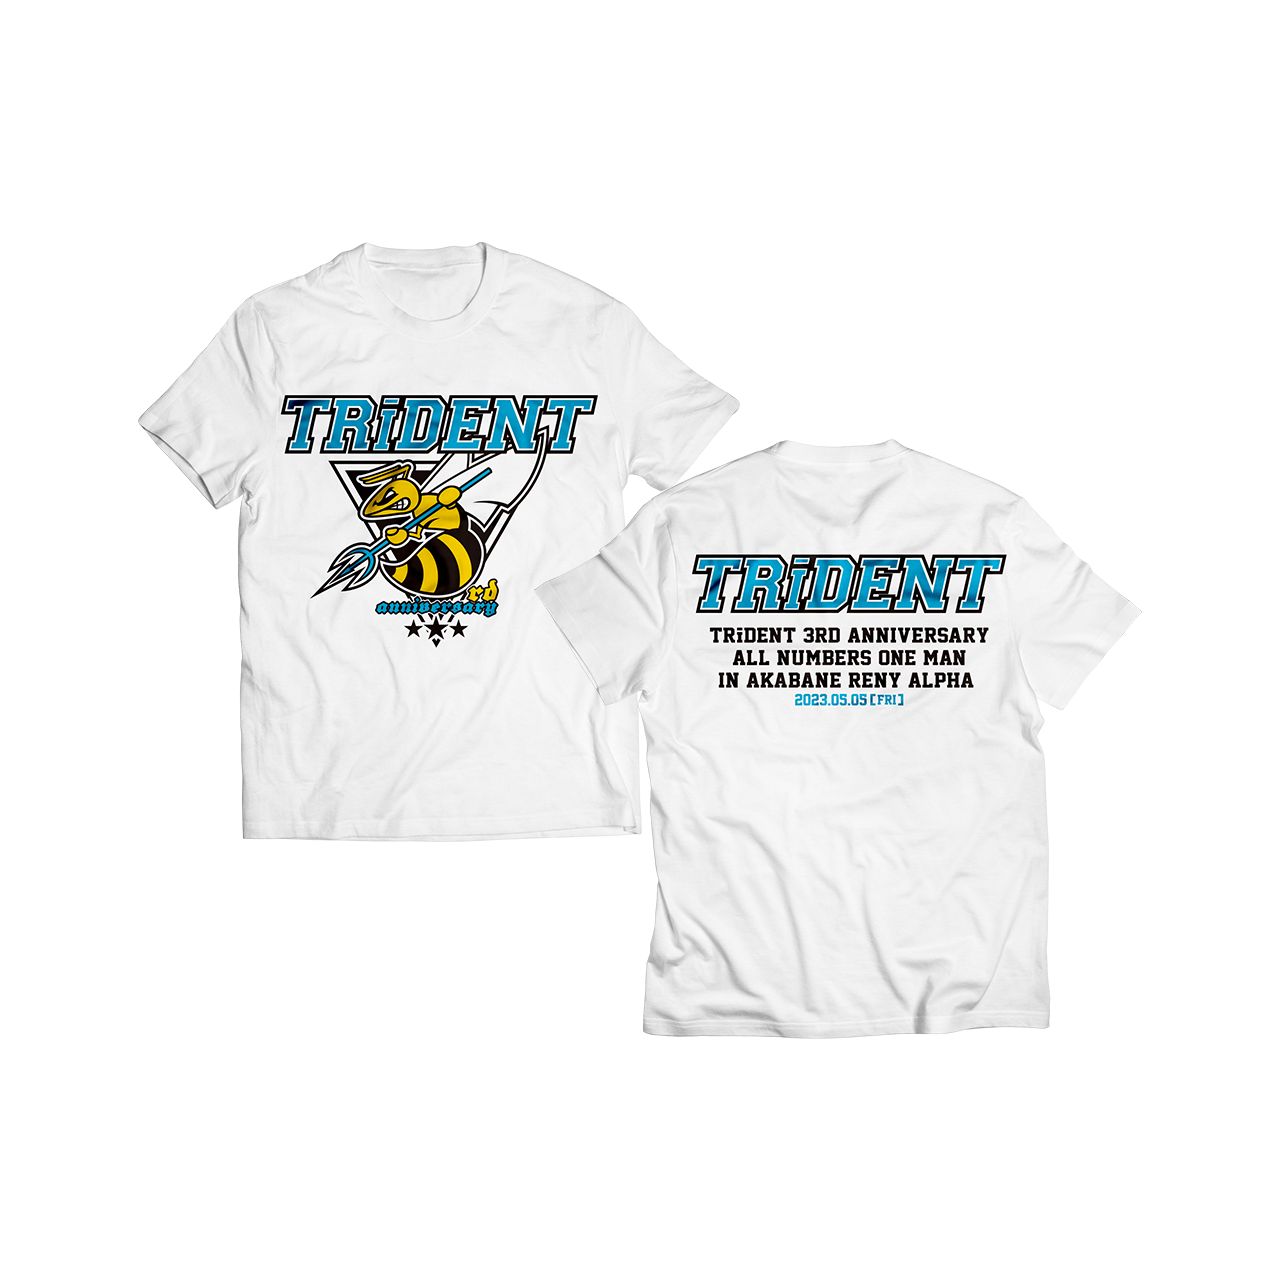 TRiDENT 3rd Anniversary T-shirt (Limited Edition)